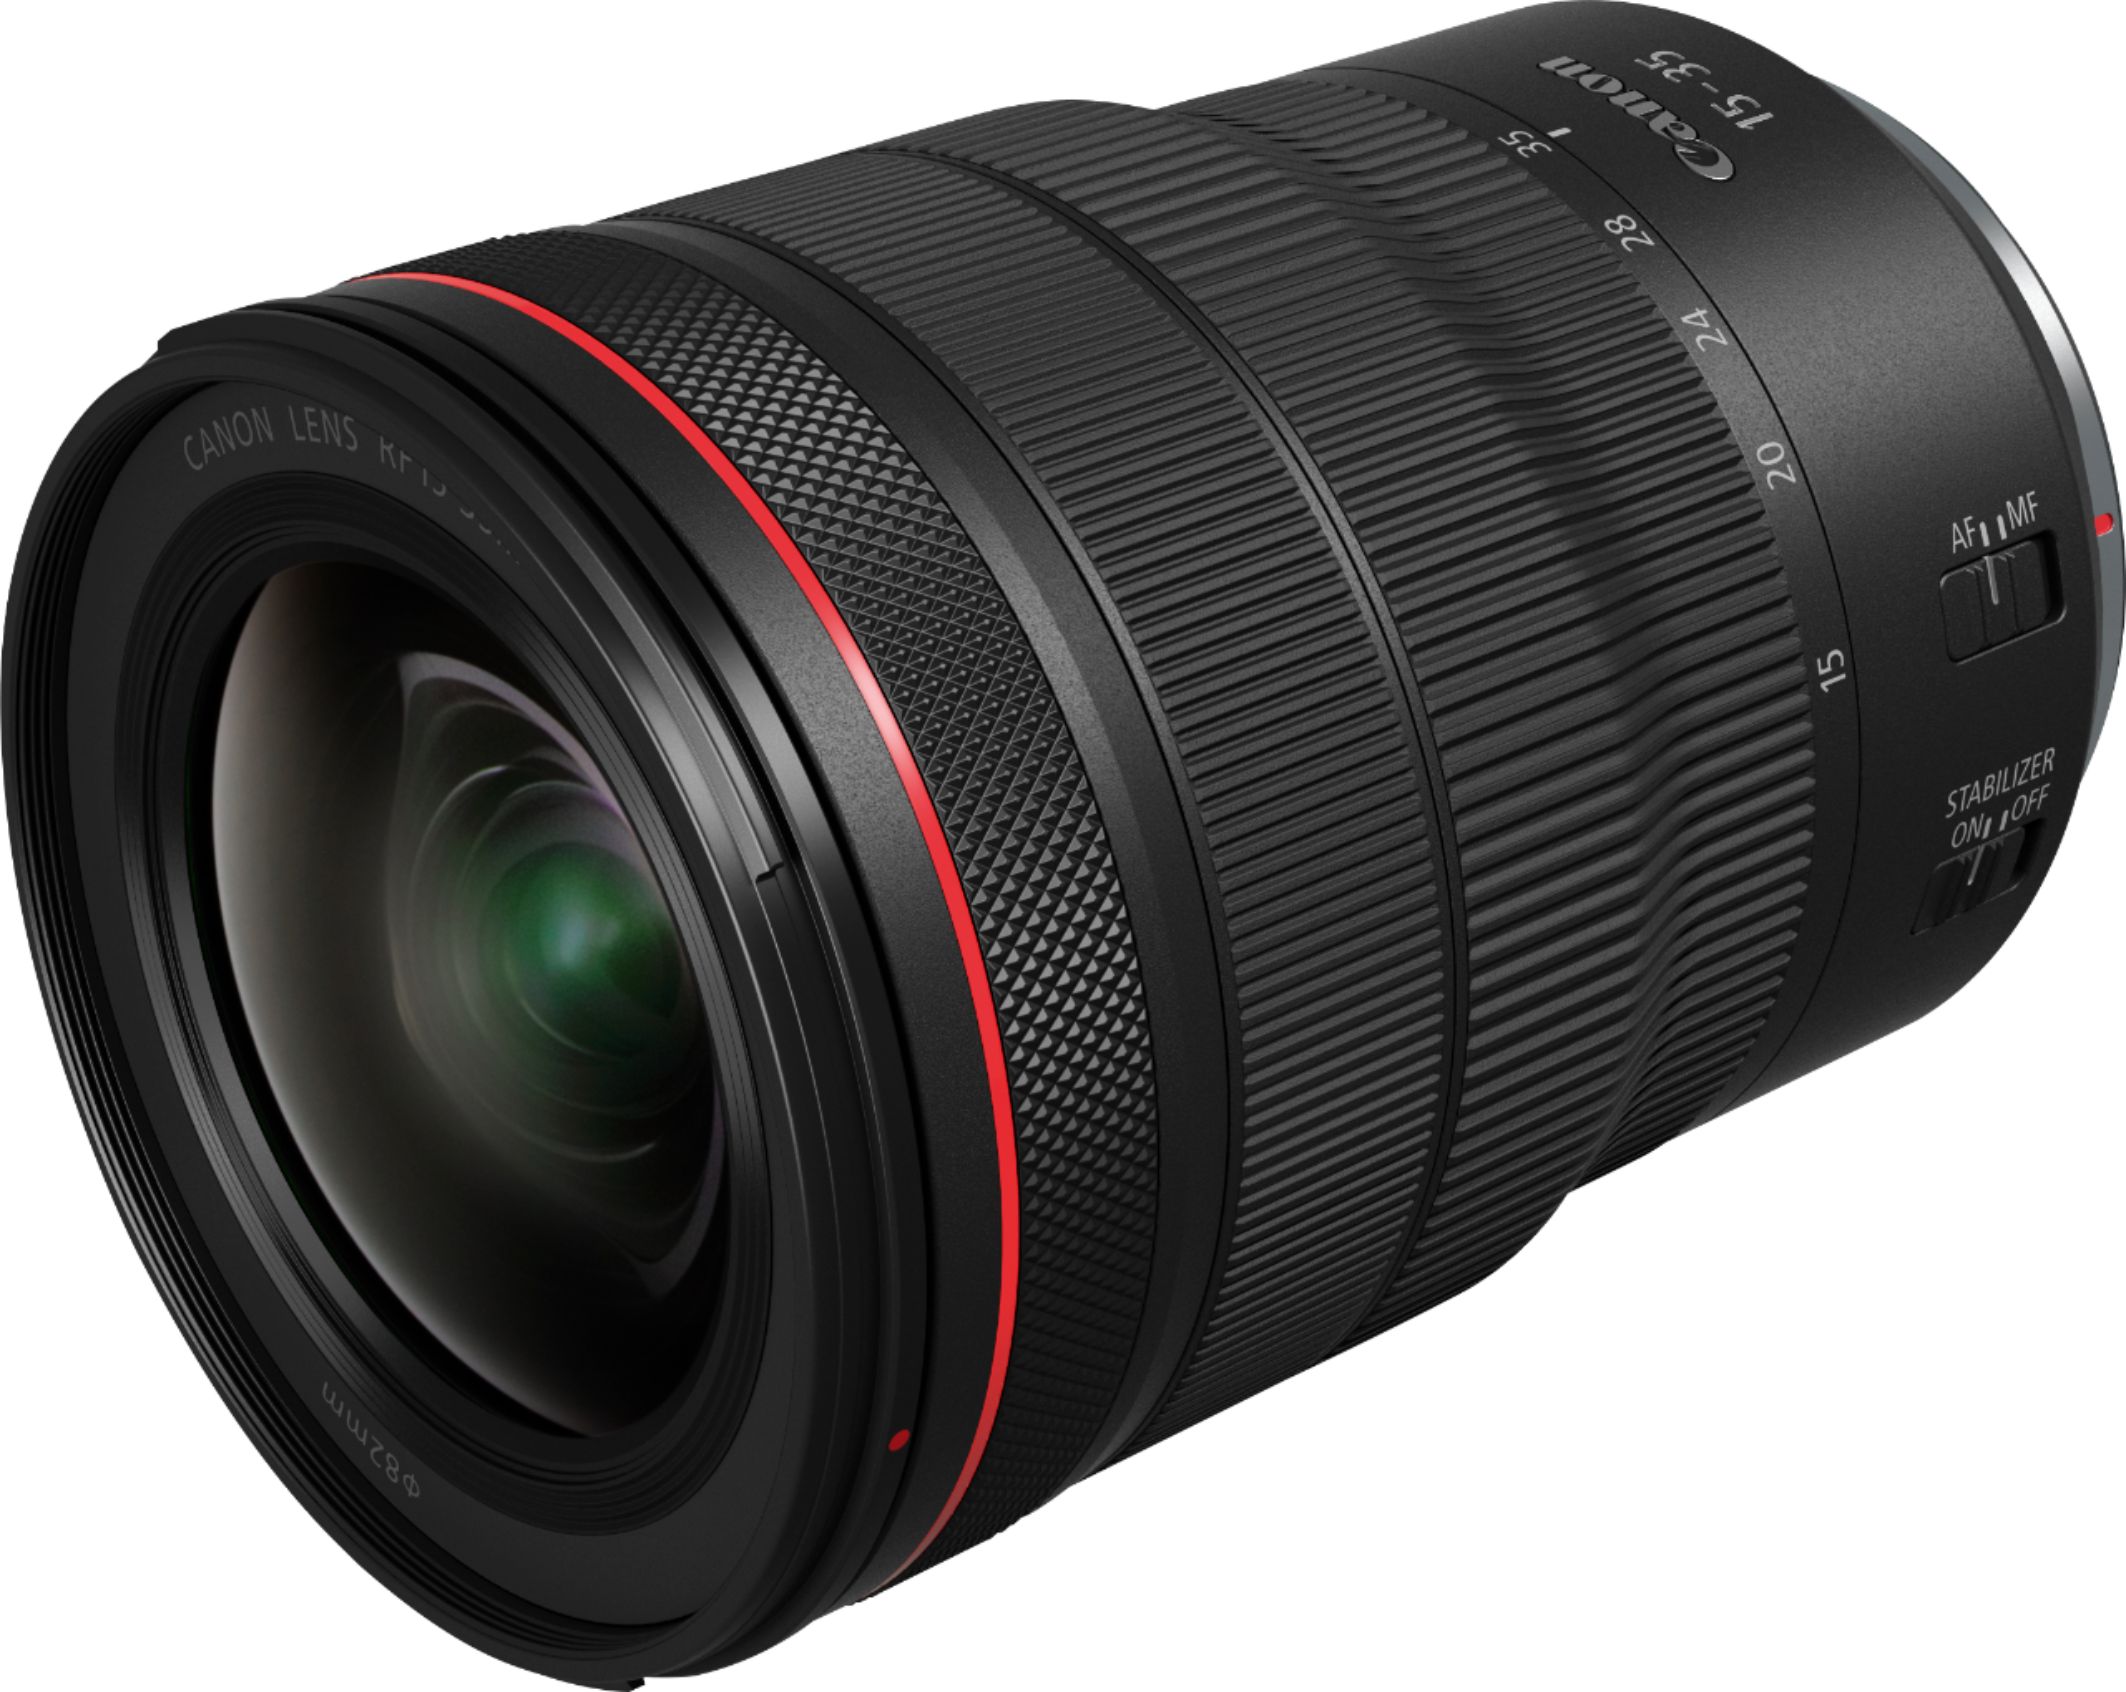 Angle View: Canon - RF15-35mm F2.8L IS USM Ultra-Wide-Angle Zoom Lens for EOS R-Series Cameras - Black